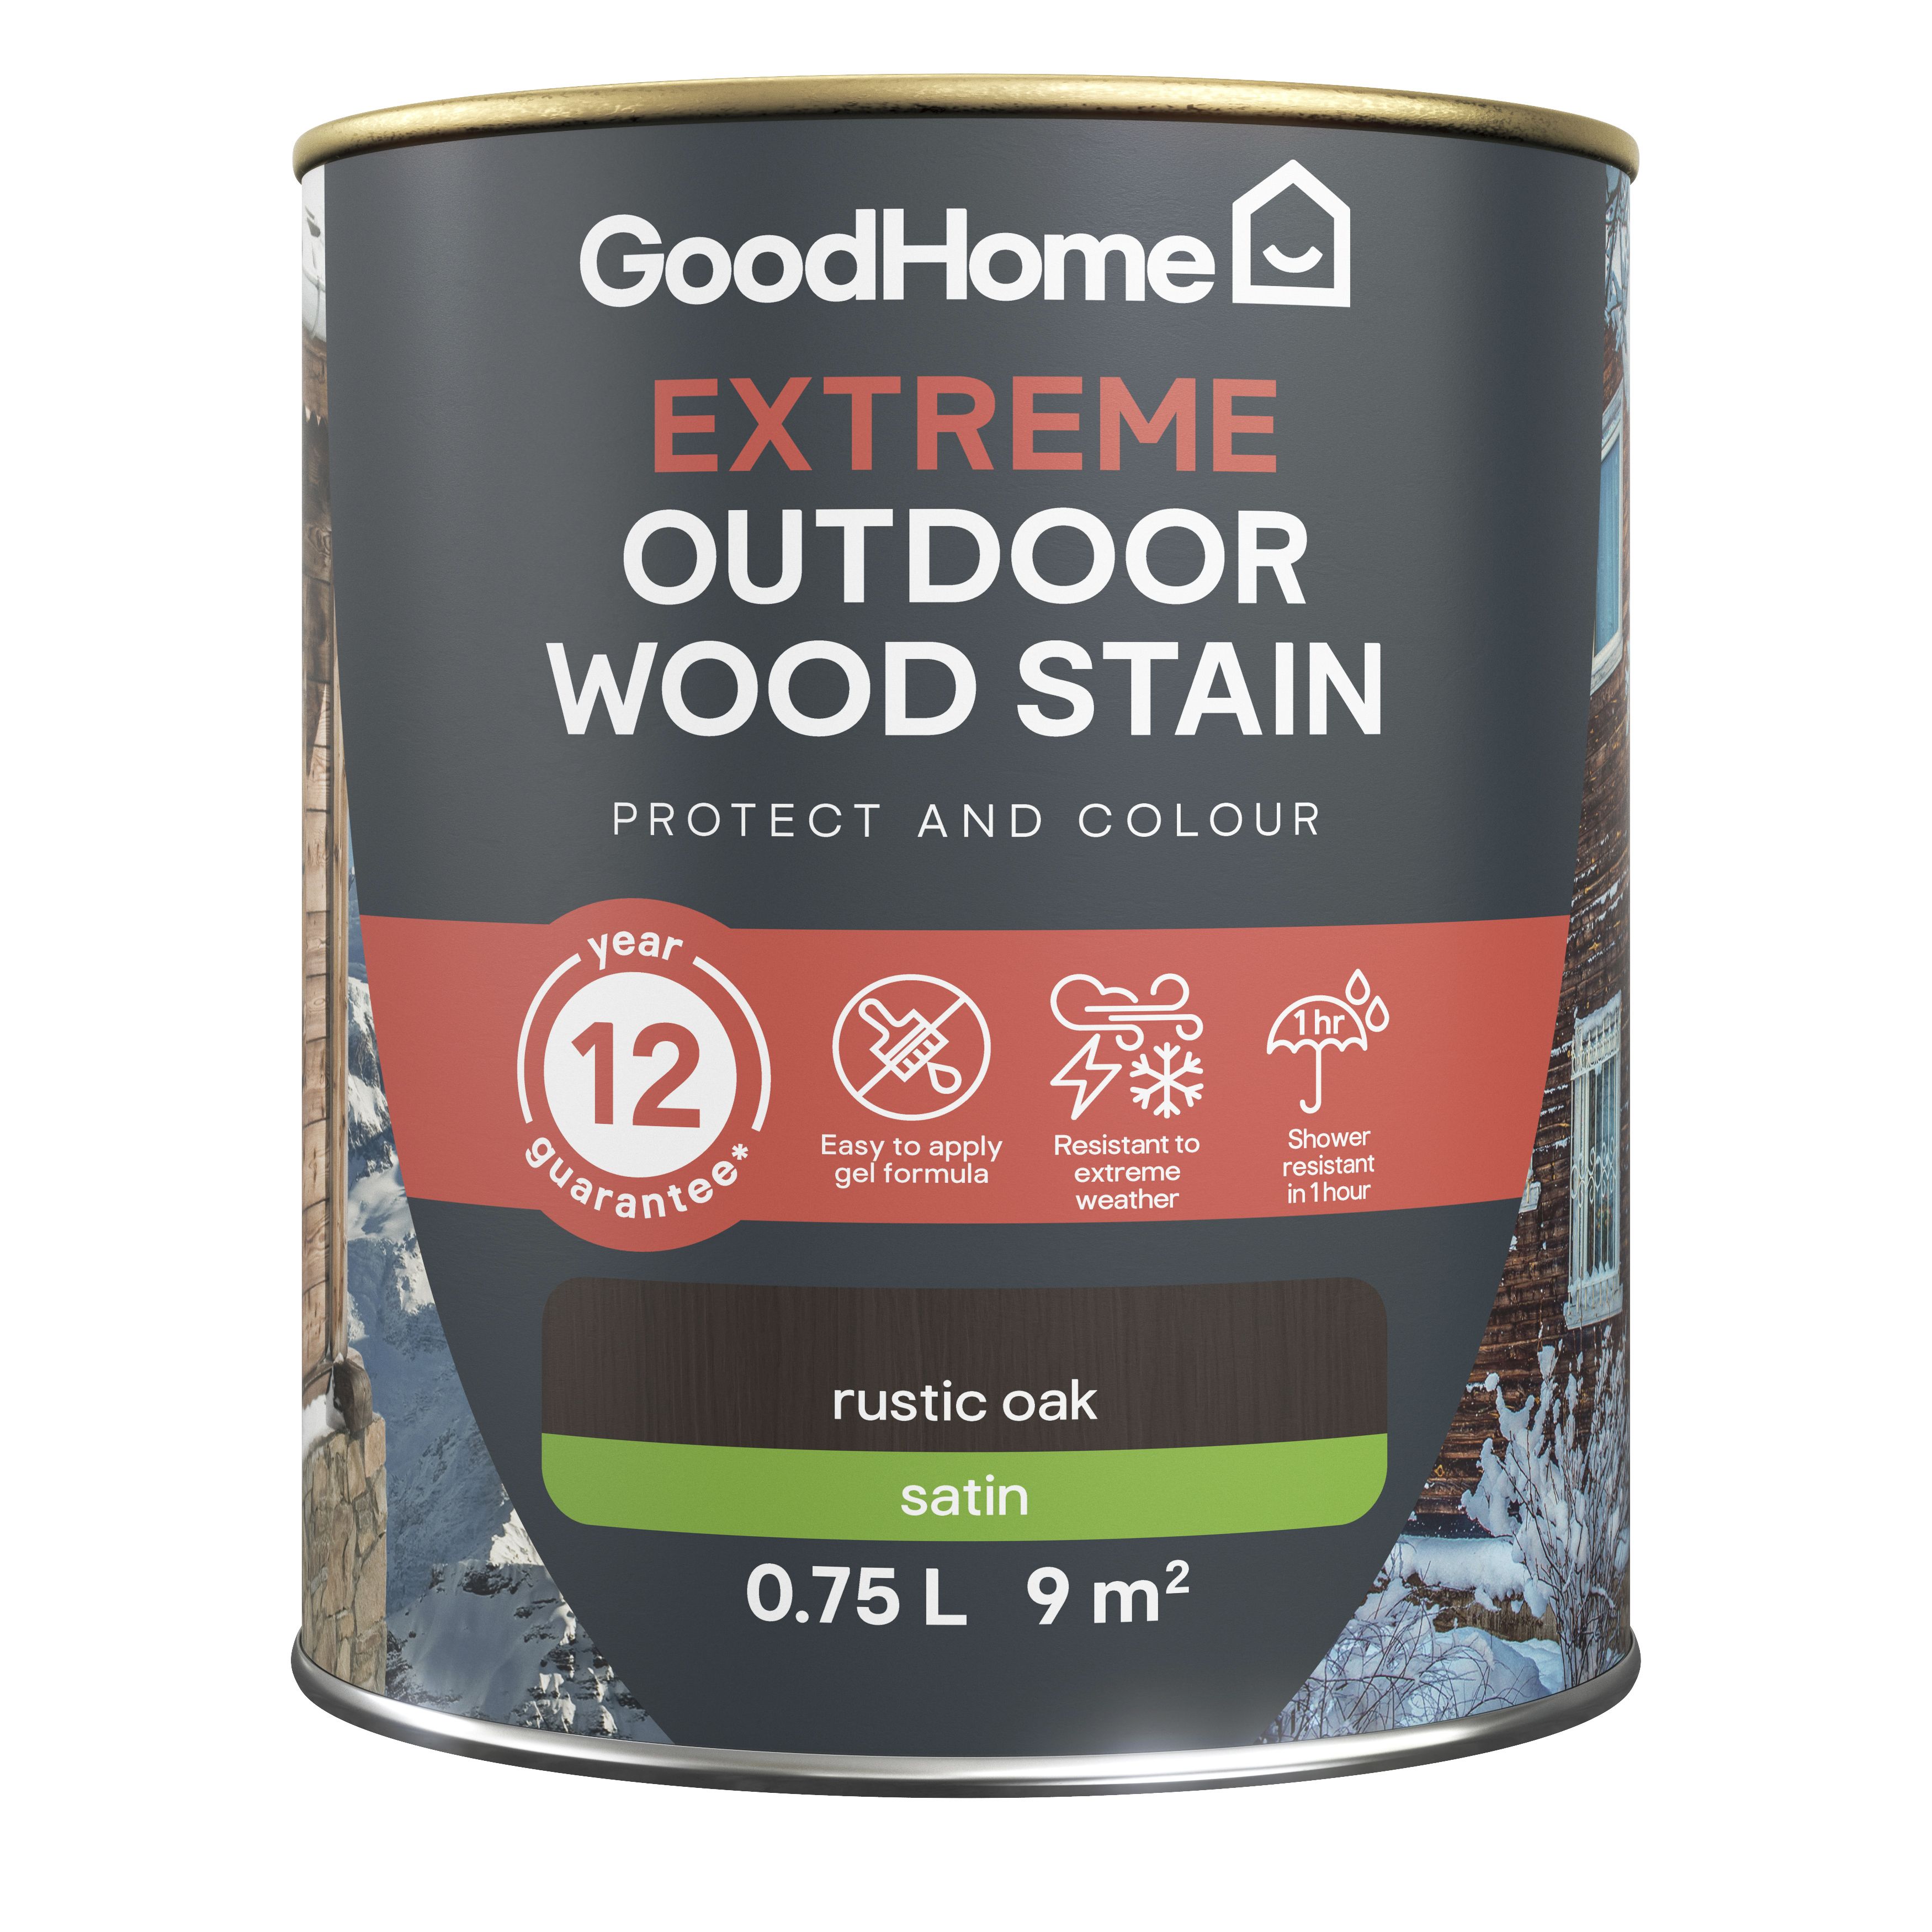 GoodHome Extreme Outdoor Rustic Oak Satin Quick dry Wood stain, 750ml